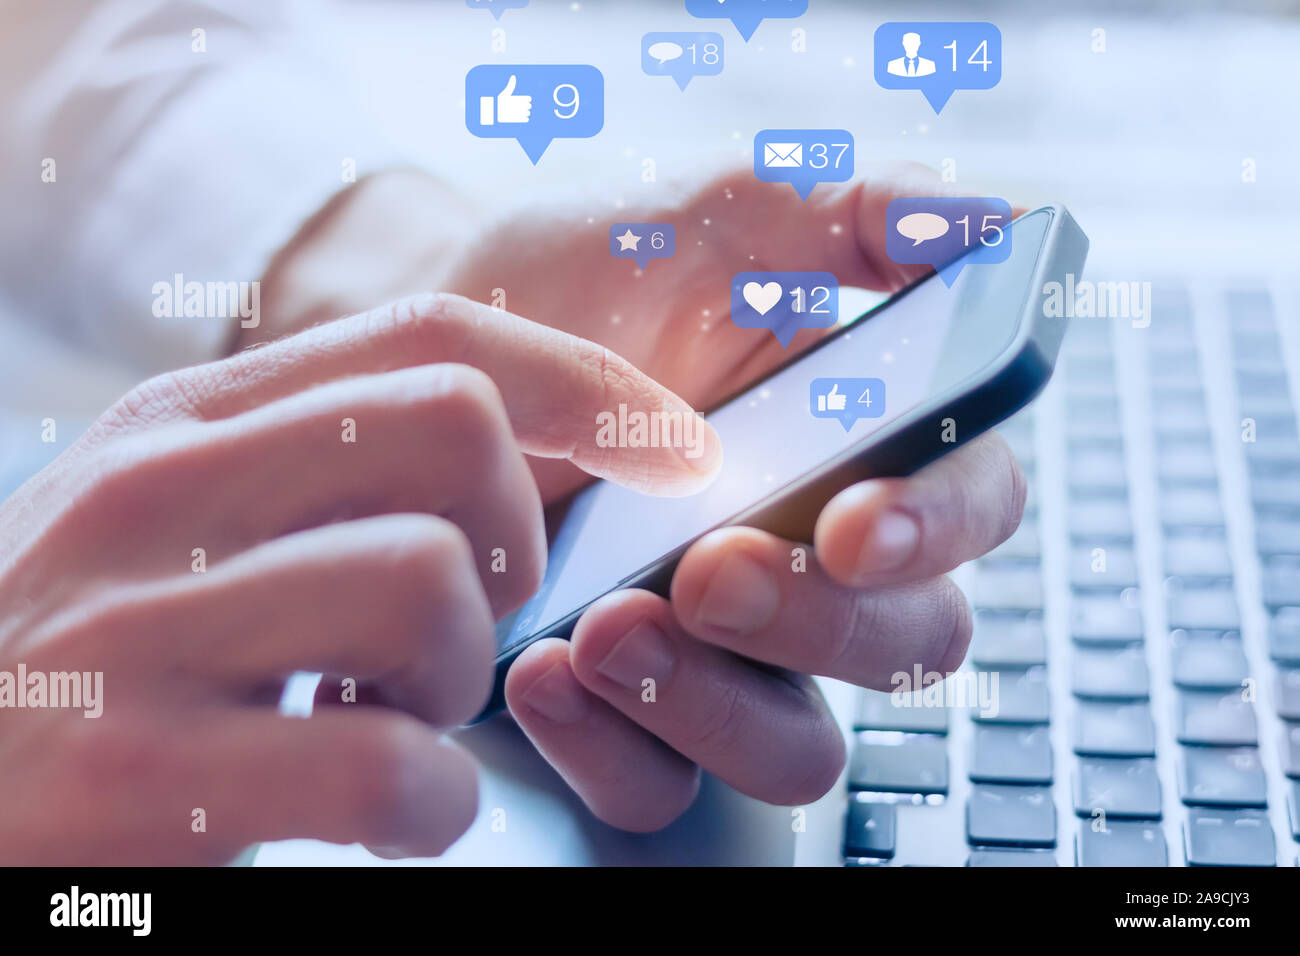 Social media interactions on mobile phone, concept with notification icons of like, message, email, comment and star above smartphone screen, person h Stock Photo